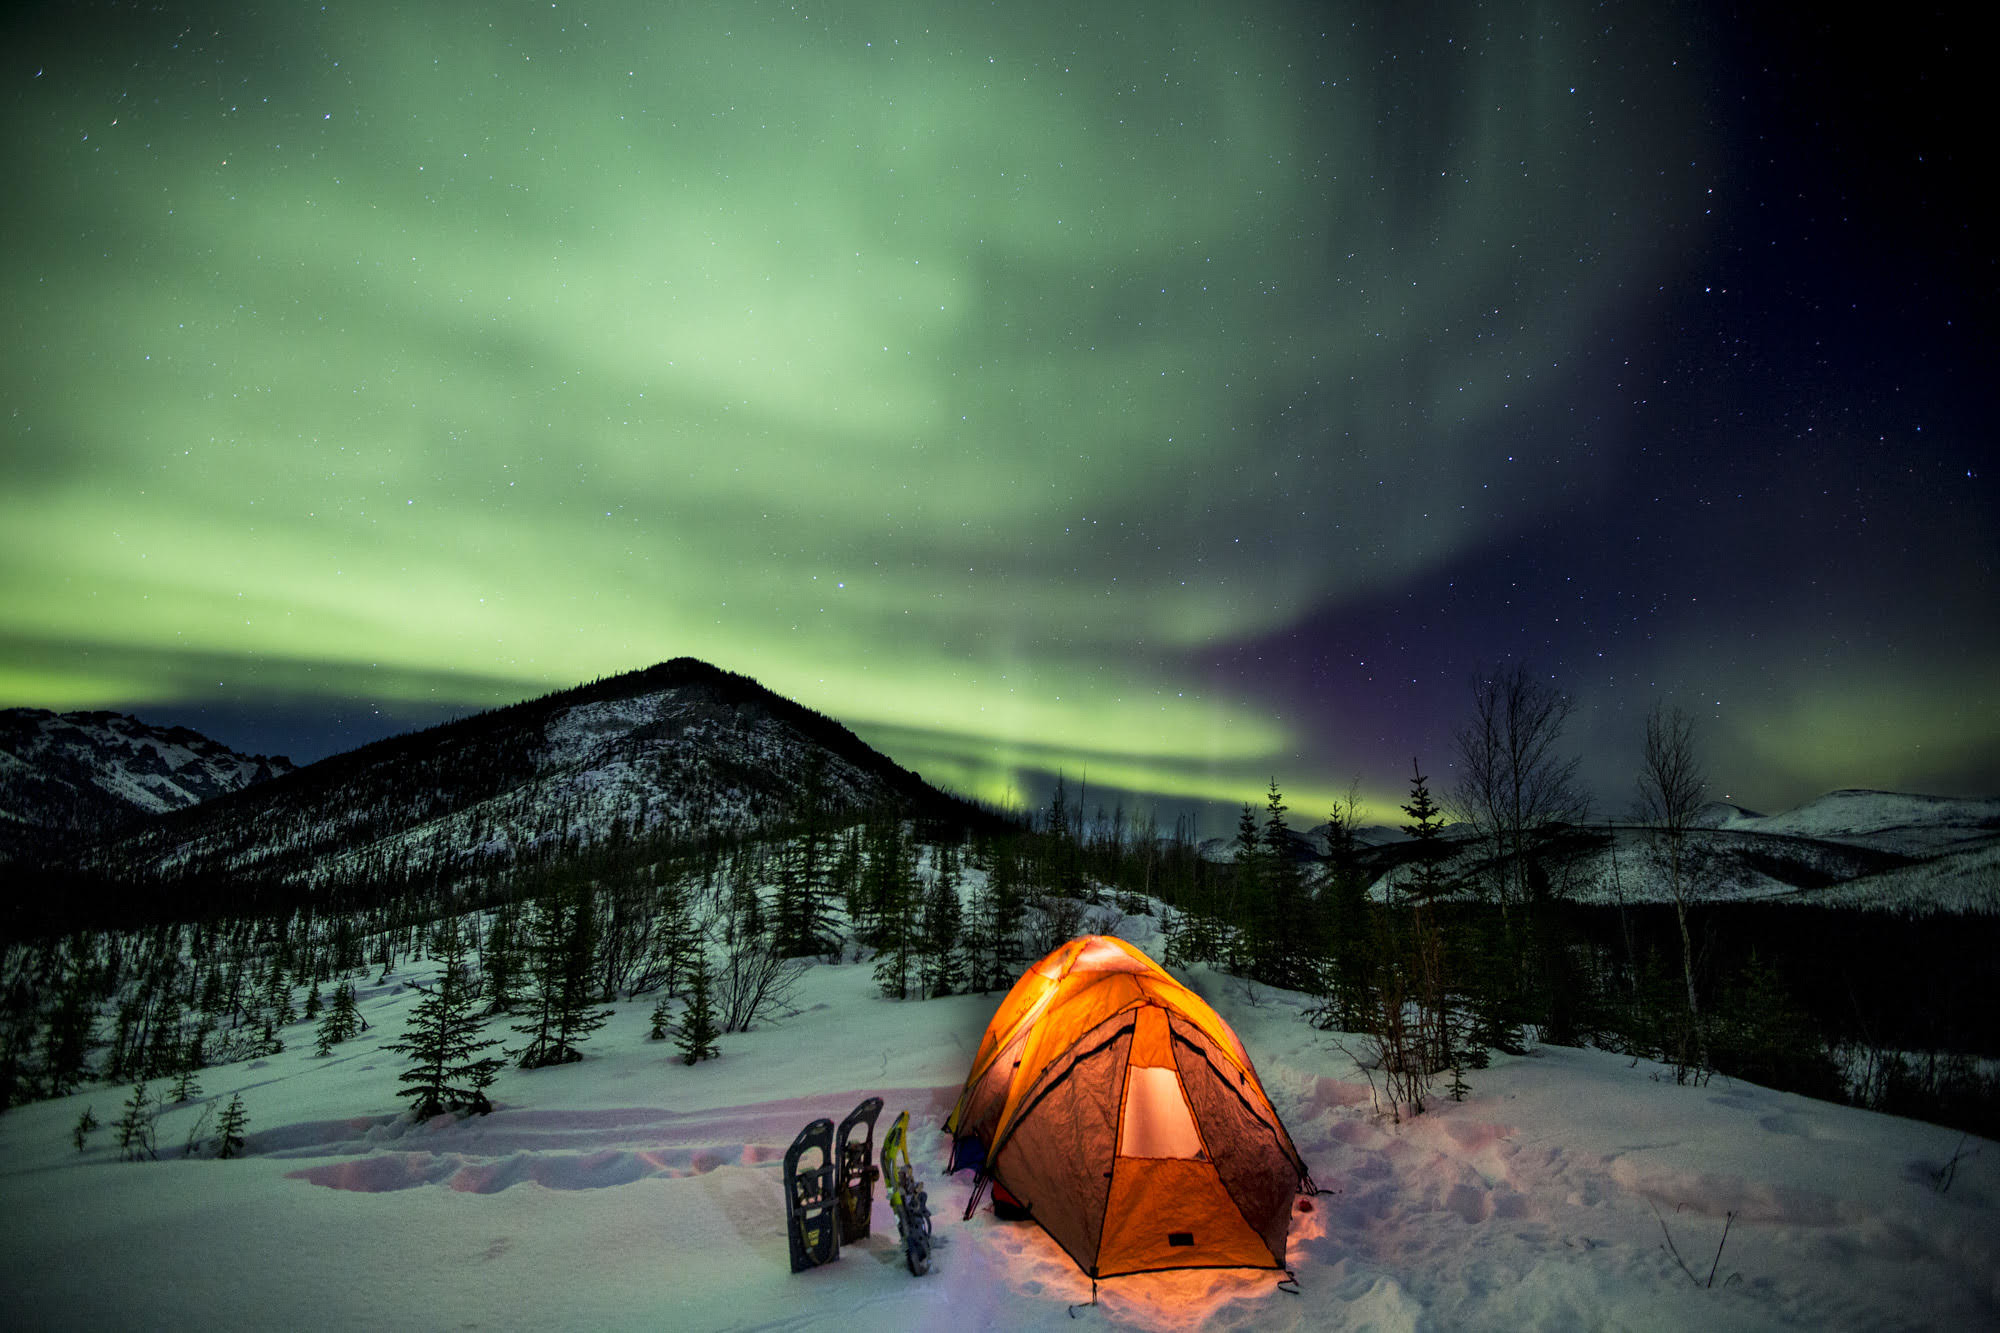 The northern lights look green in the sky over an orange tent